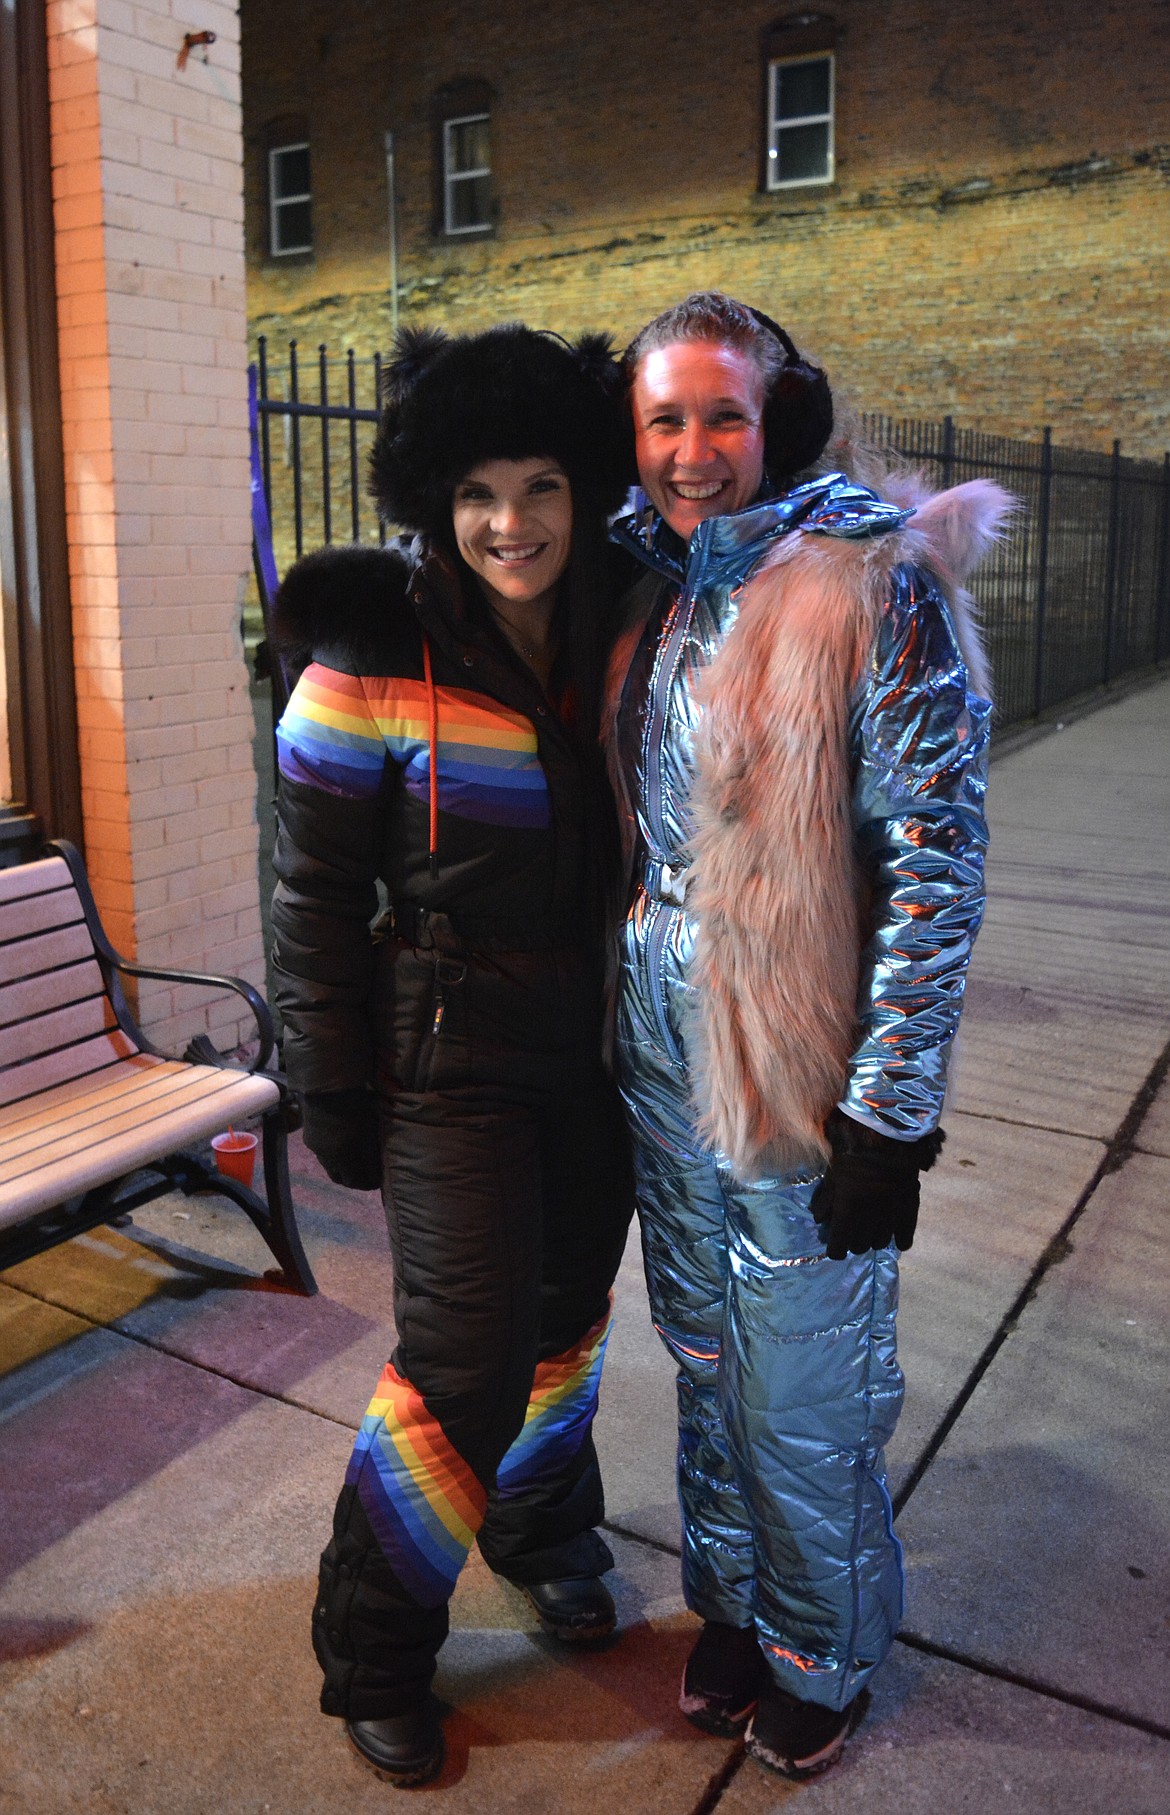 Coeur d’Alene residents Audra Pardy and Adelle Bondurant came to Wallace decked out in colorful ski gear. Part of the festivities for the weekend include an 80s costume contest.